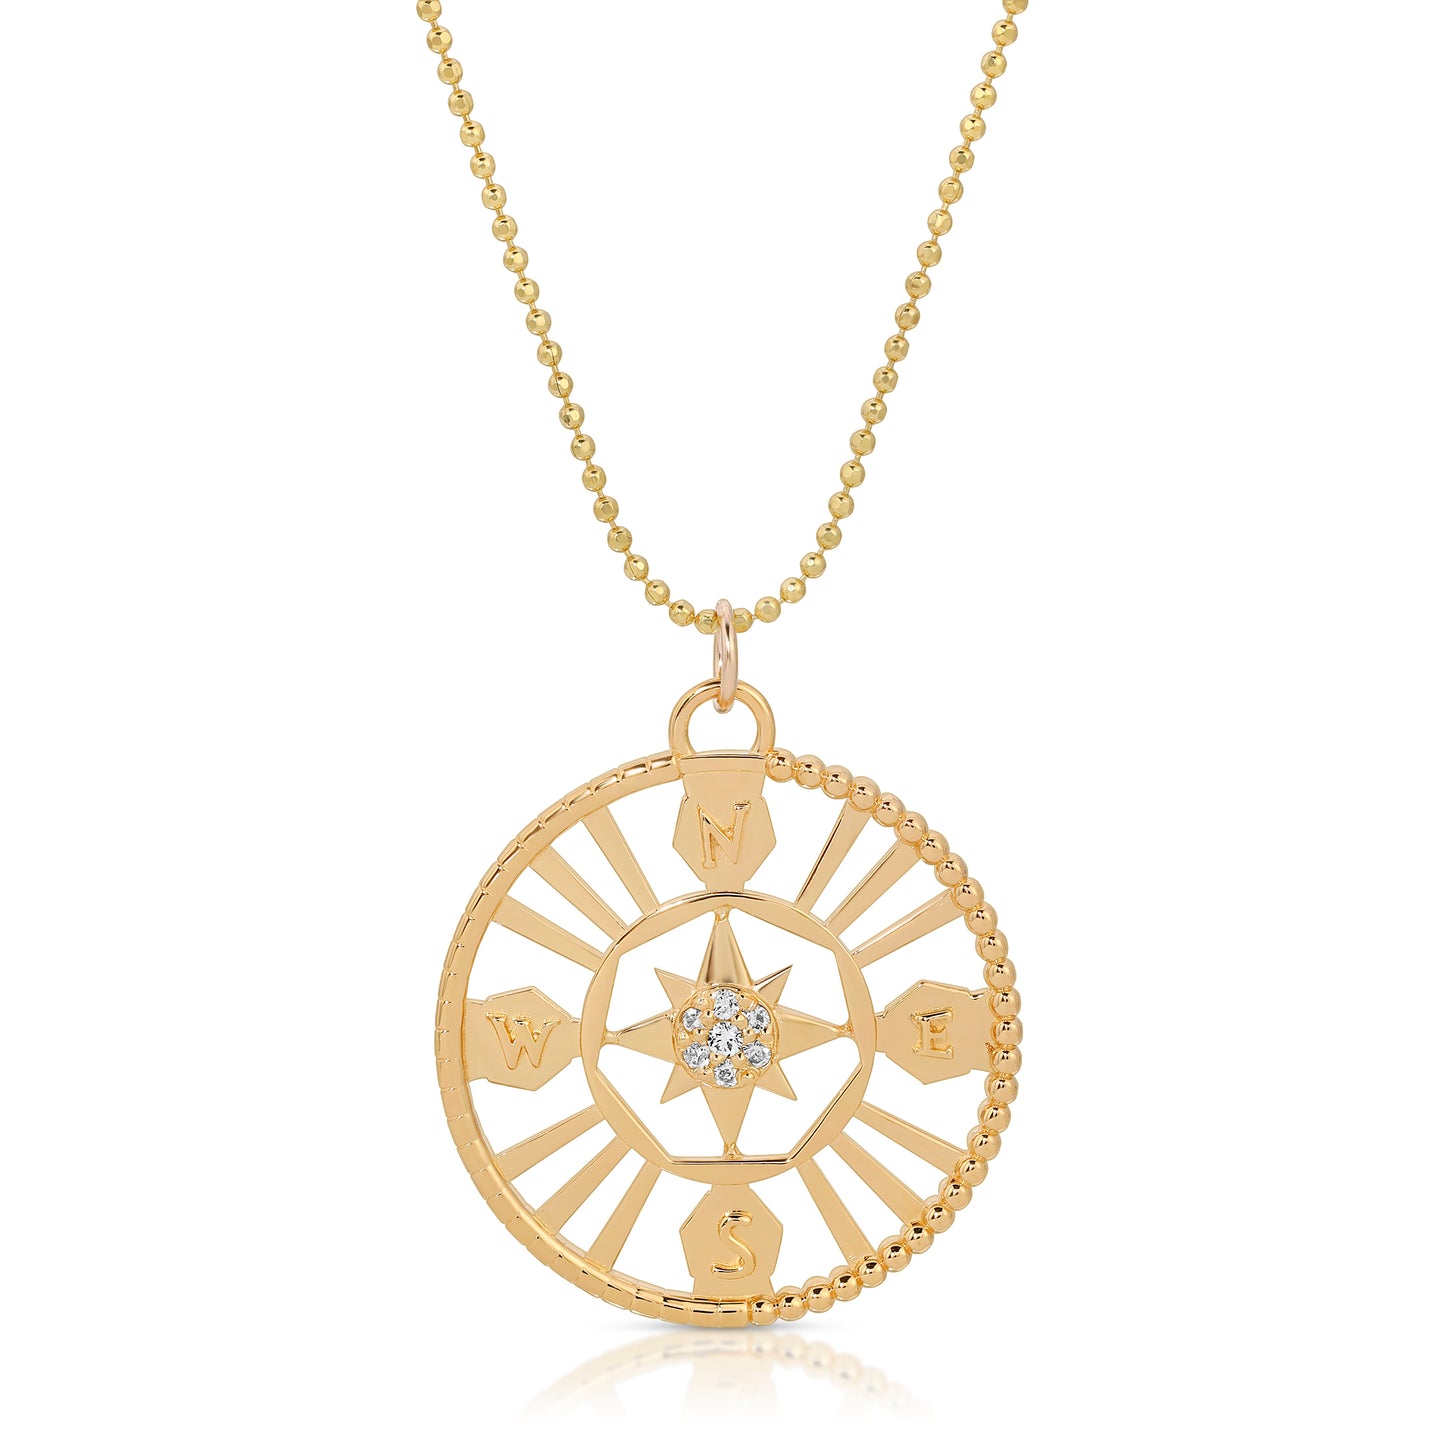 7 diamond Compass Pendant in Gold from the wandering jewel